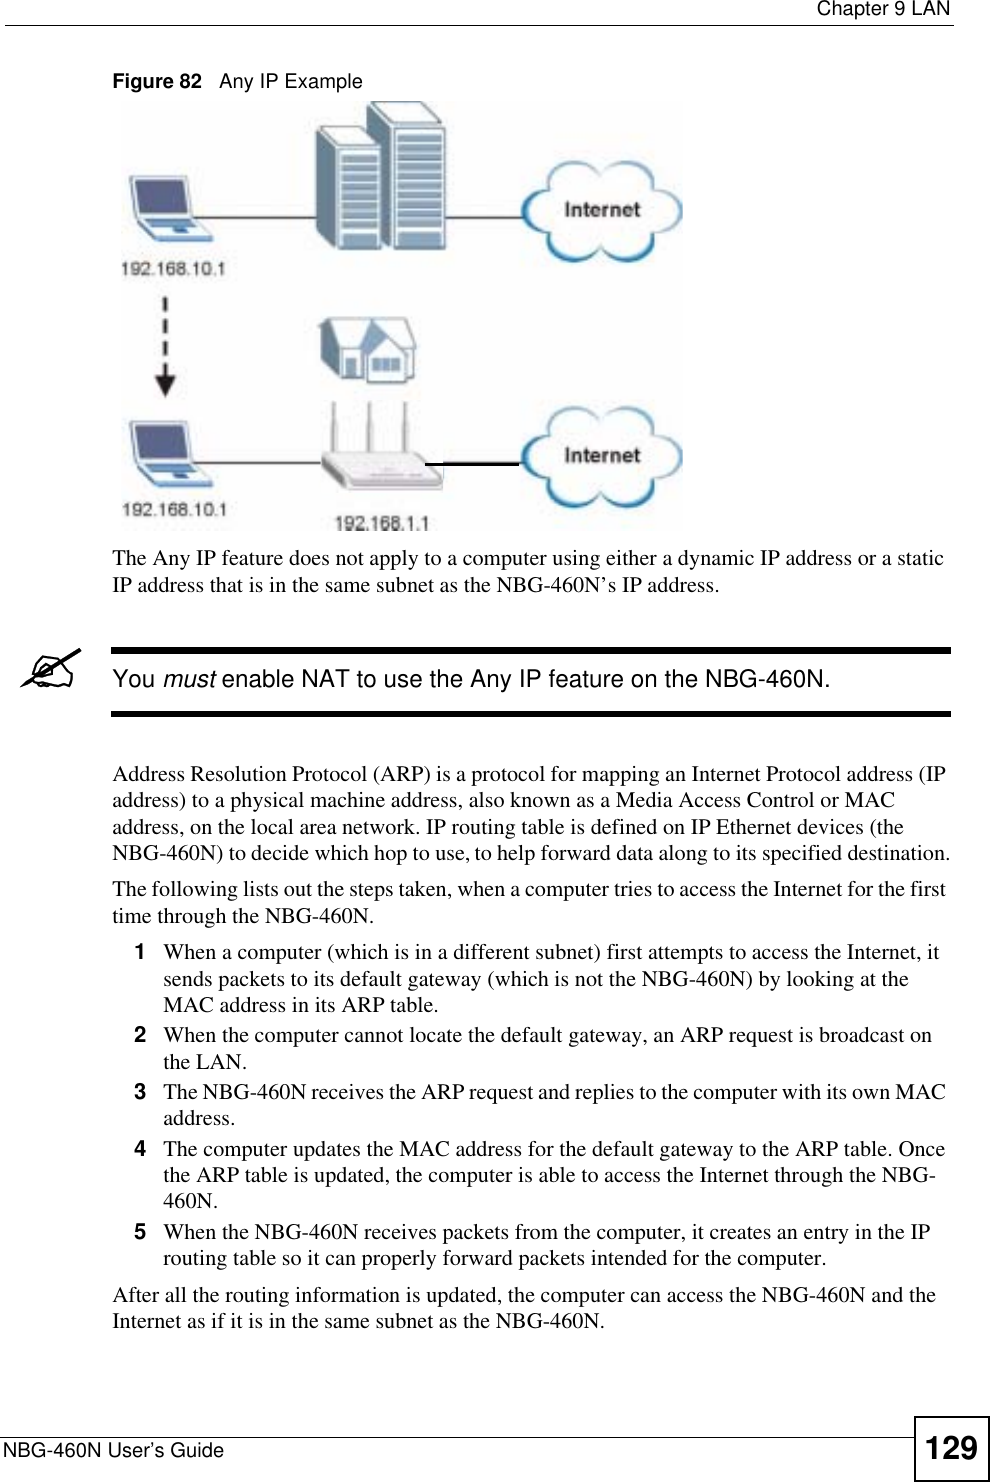  Chapter 9 LANNBG-460N User’s Guide 129Figure 82   Any IP ExampleThe Any IP feature does not apply to a computer using either a dynamic IP address or a static IP address that is in the same subnet as the NBG-460N’s IP address.&quot;You must enable NAT to use the Any IP feature on the NBG-460N. Address Resolution Protocol (ARP) is a protocol for mapping an Internet Protocol address (IP address) to a physical machine address, also known as a Media Access Control or MAC address, on the local area network. IP routing table is defined on IP Ethernet devices (the NBG-460N) to decide which hop to use, to help forward data along to its specified destination.The following lists out the steps taken, when a computer tries to access the Internet for the first time through the NBG-460N.1When a computer (which is in a different subnet) first attempts to access the Internet, it sends packets to its default gateway (which is not the NBG-460N) by looking at the MAC address in its ARP table. 2When the computer cannot locate the default gateway, an ARP request is broadcast on the LAN. 3The NBG-460N receives the ARP request and replies to the computer with its own MAC address. 4The computer updates the MAC address for the default gateway to the ARP table. Once the ARP table is updated, the computer is able to access the Internet through the NBG-460N. 5When the NBG-460N receives packets from the computer, it creates an entry in the IP routing table so it can properly forward packets intended for the computer. After all the routing information is updated, the computer can access the NBG-460N and the Internet as if it is in the same subnet as the NBG-460N. 